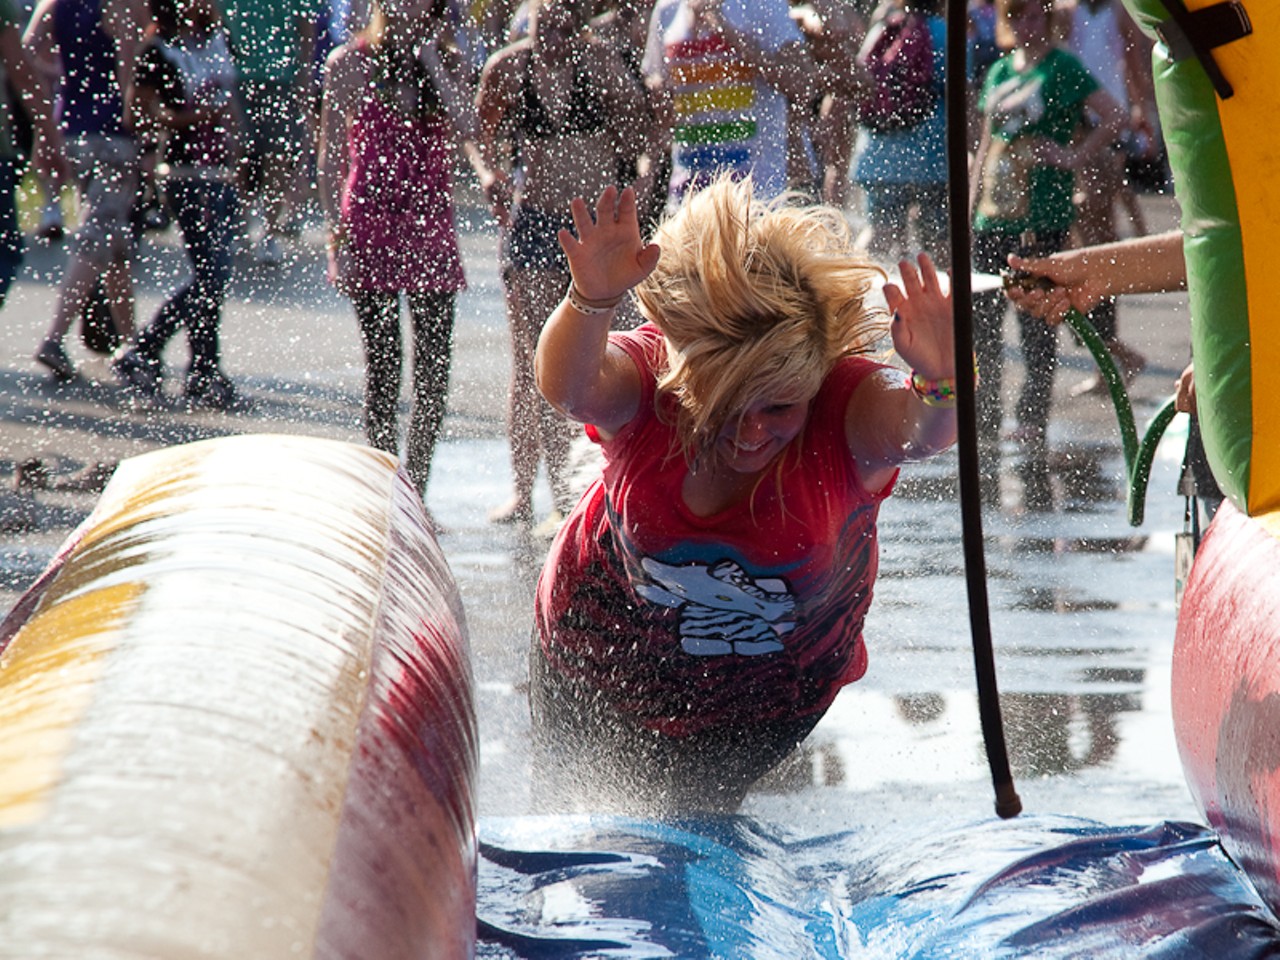 With a heat index of 101, fans would do anything to cool off, even ride an inflatable Slipe 'n' Slide.